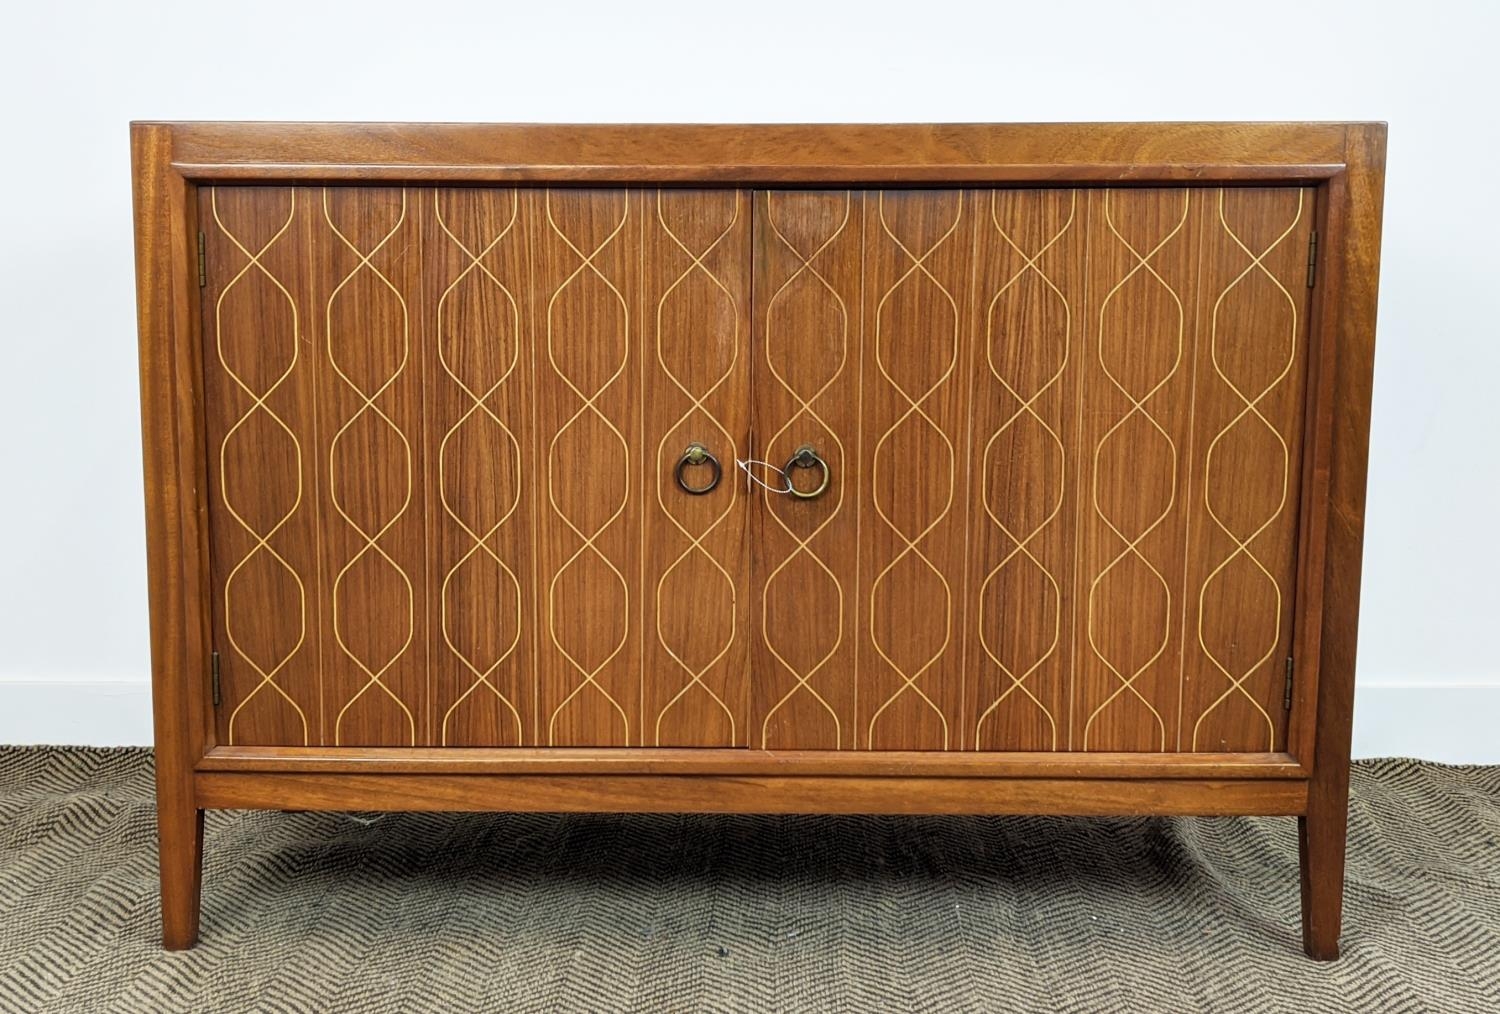 GORDON RUSSELL DOUBLE HELIX SIDEBOARD, circa 1950, sapele and teak with two doors, 84cm H x 122cm - Image 2 of 9